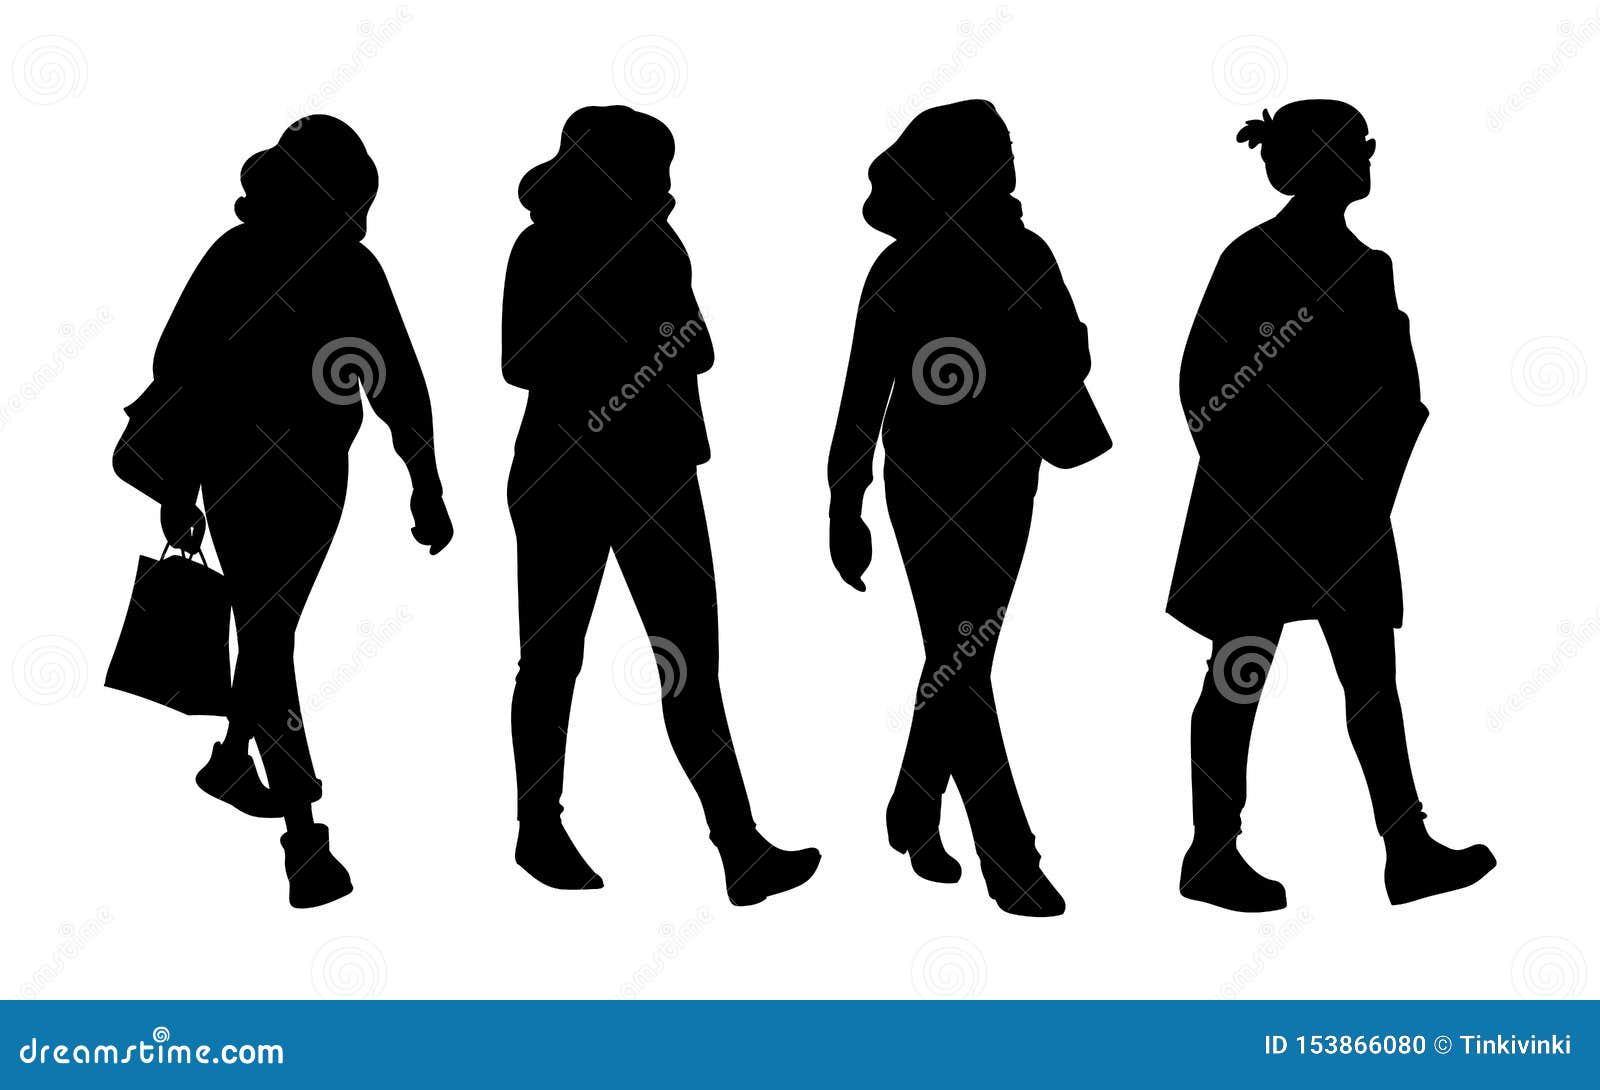 Set Of Women Taking A Walk Concept Monochrome Vector Illustration Of Silhouettes Of Women Walking In Different Poses Stock Vector Illustration Of Handbag Element 153866080 Yoga silhoutte vector poses vector art. dreamstime com